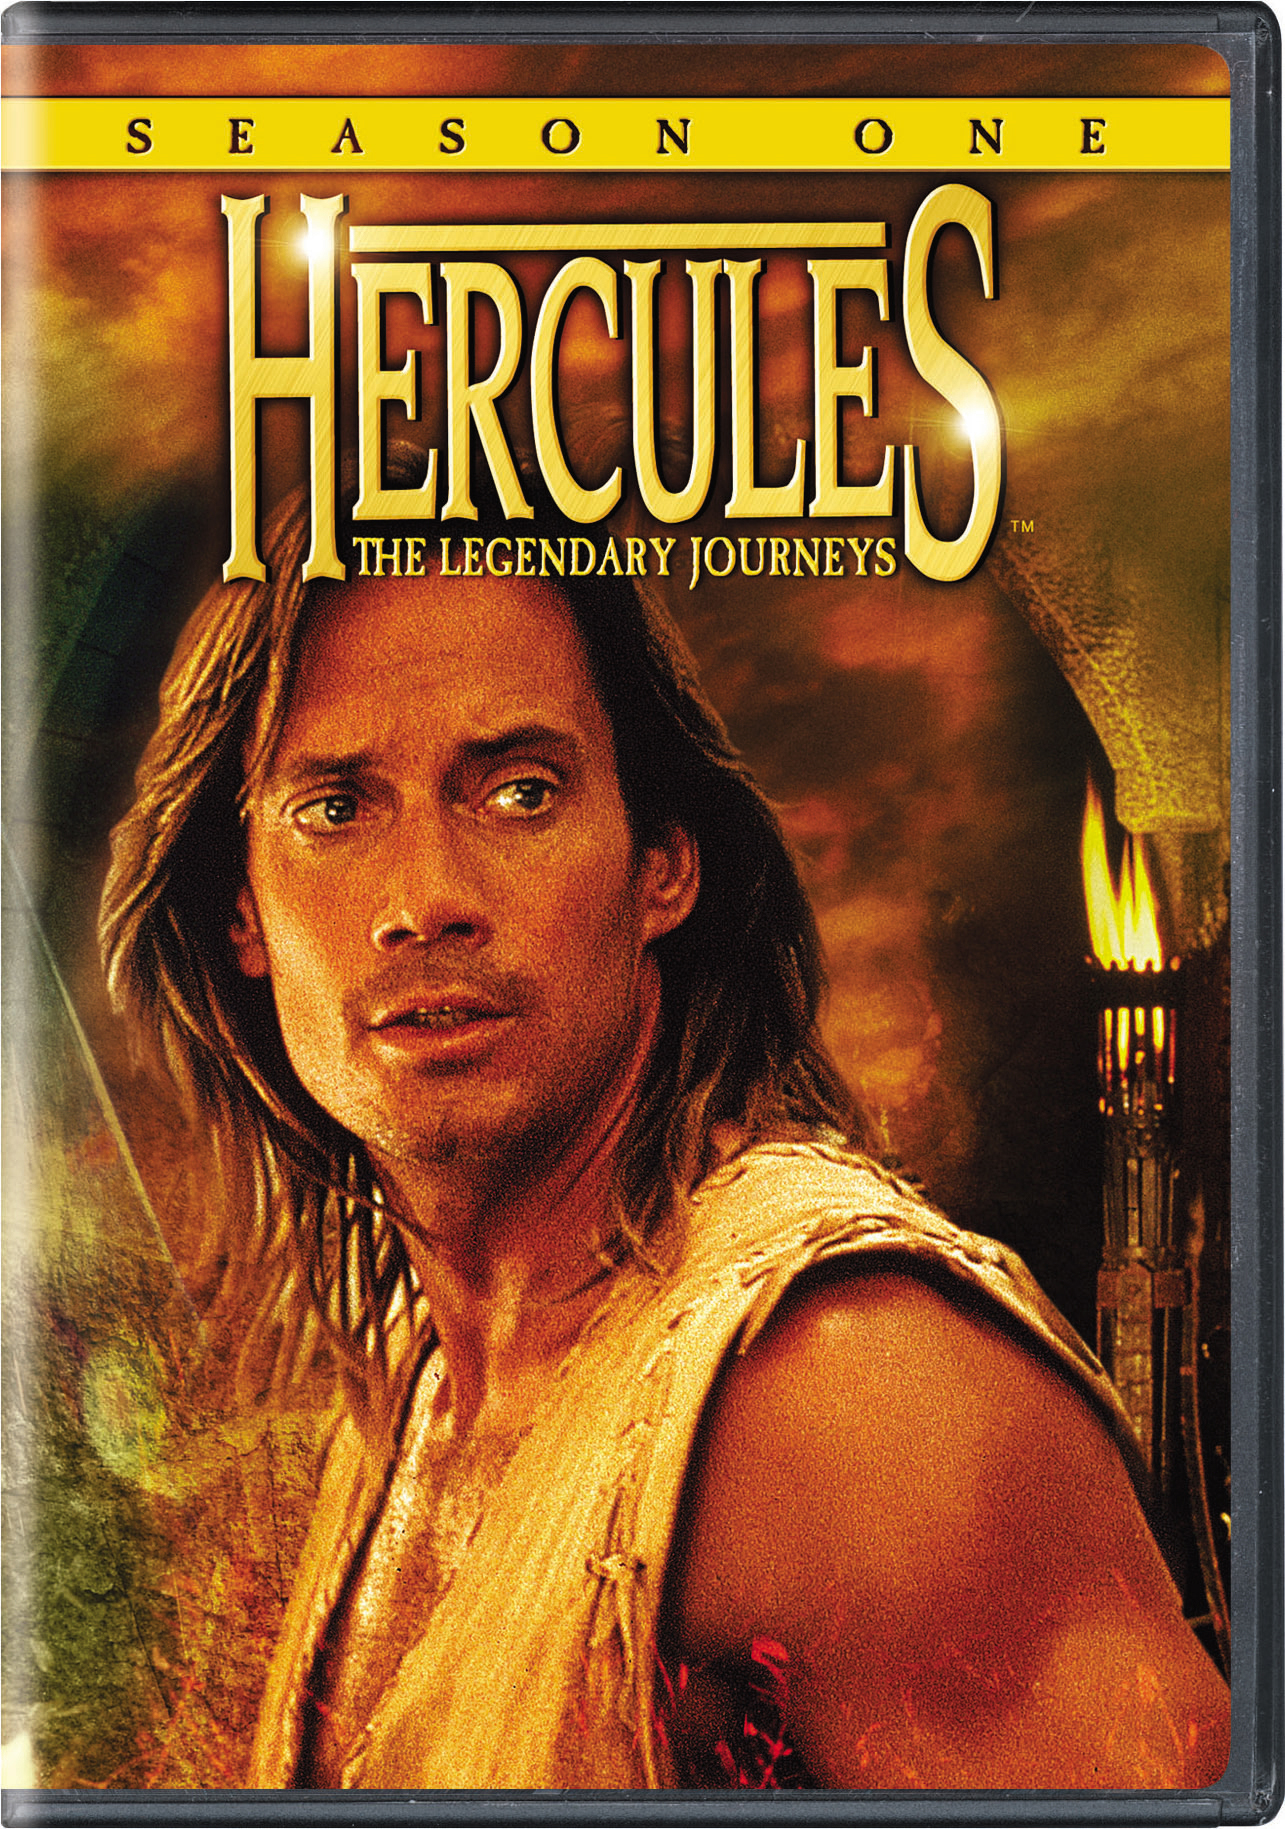 Hercules: The Legendary Journeys - Season One - DVD   - Sci Fi Television On DVD - TV Shows On GRUV